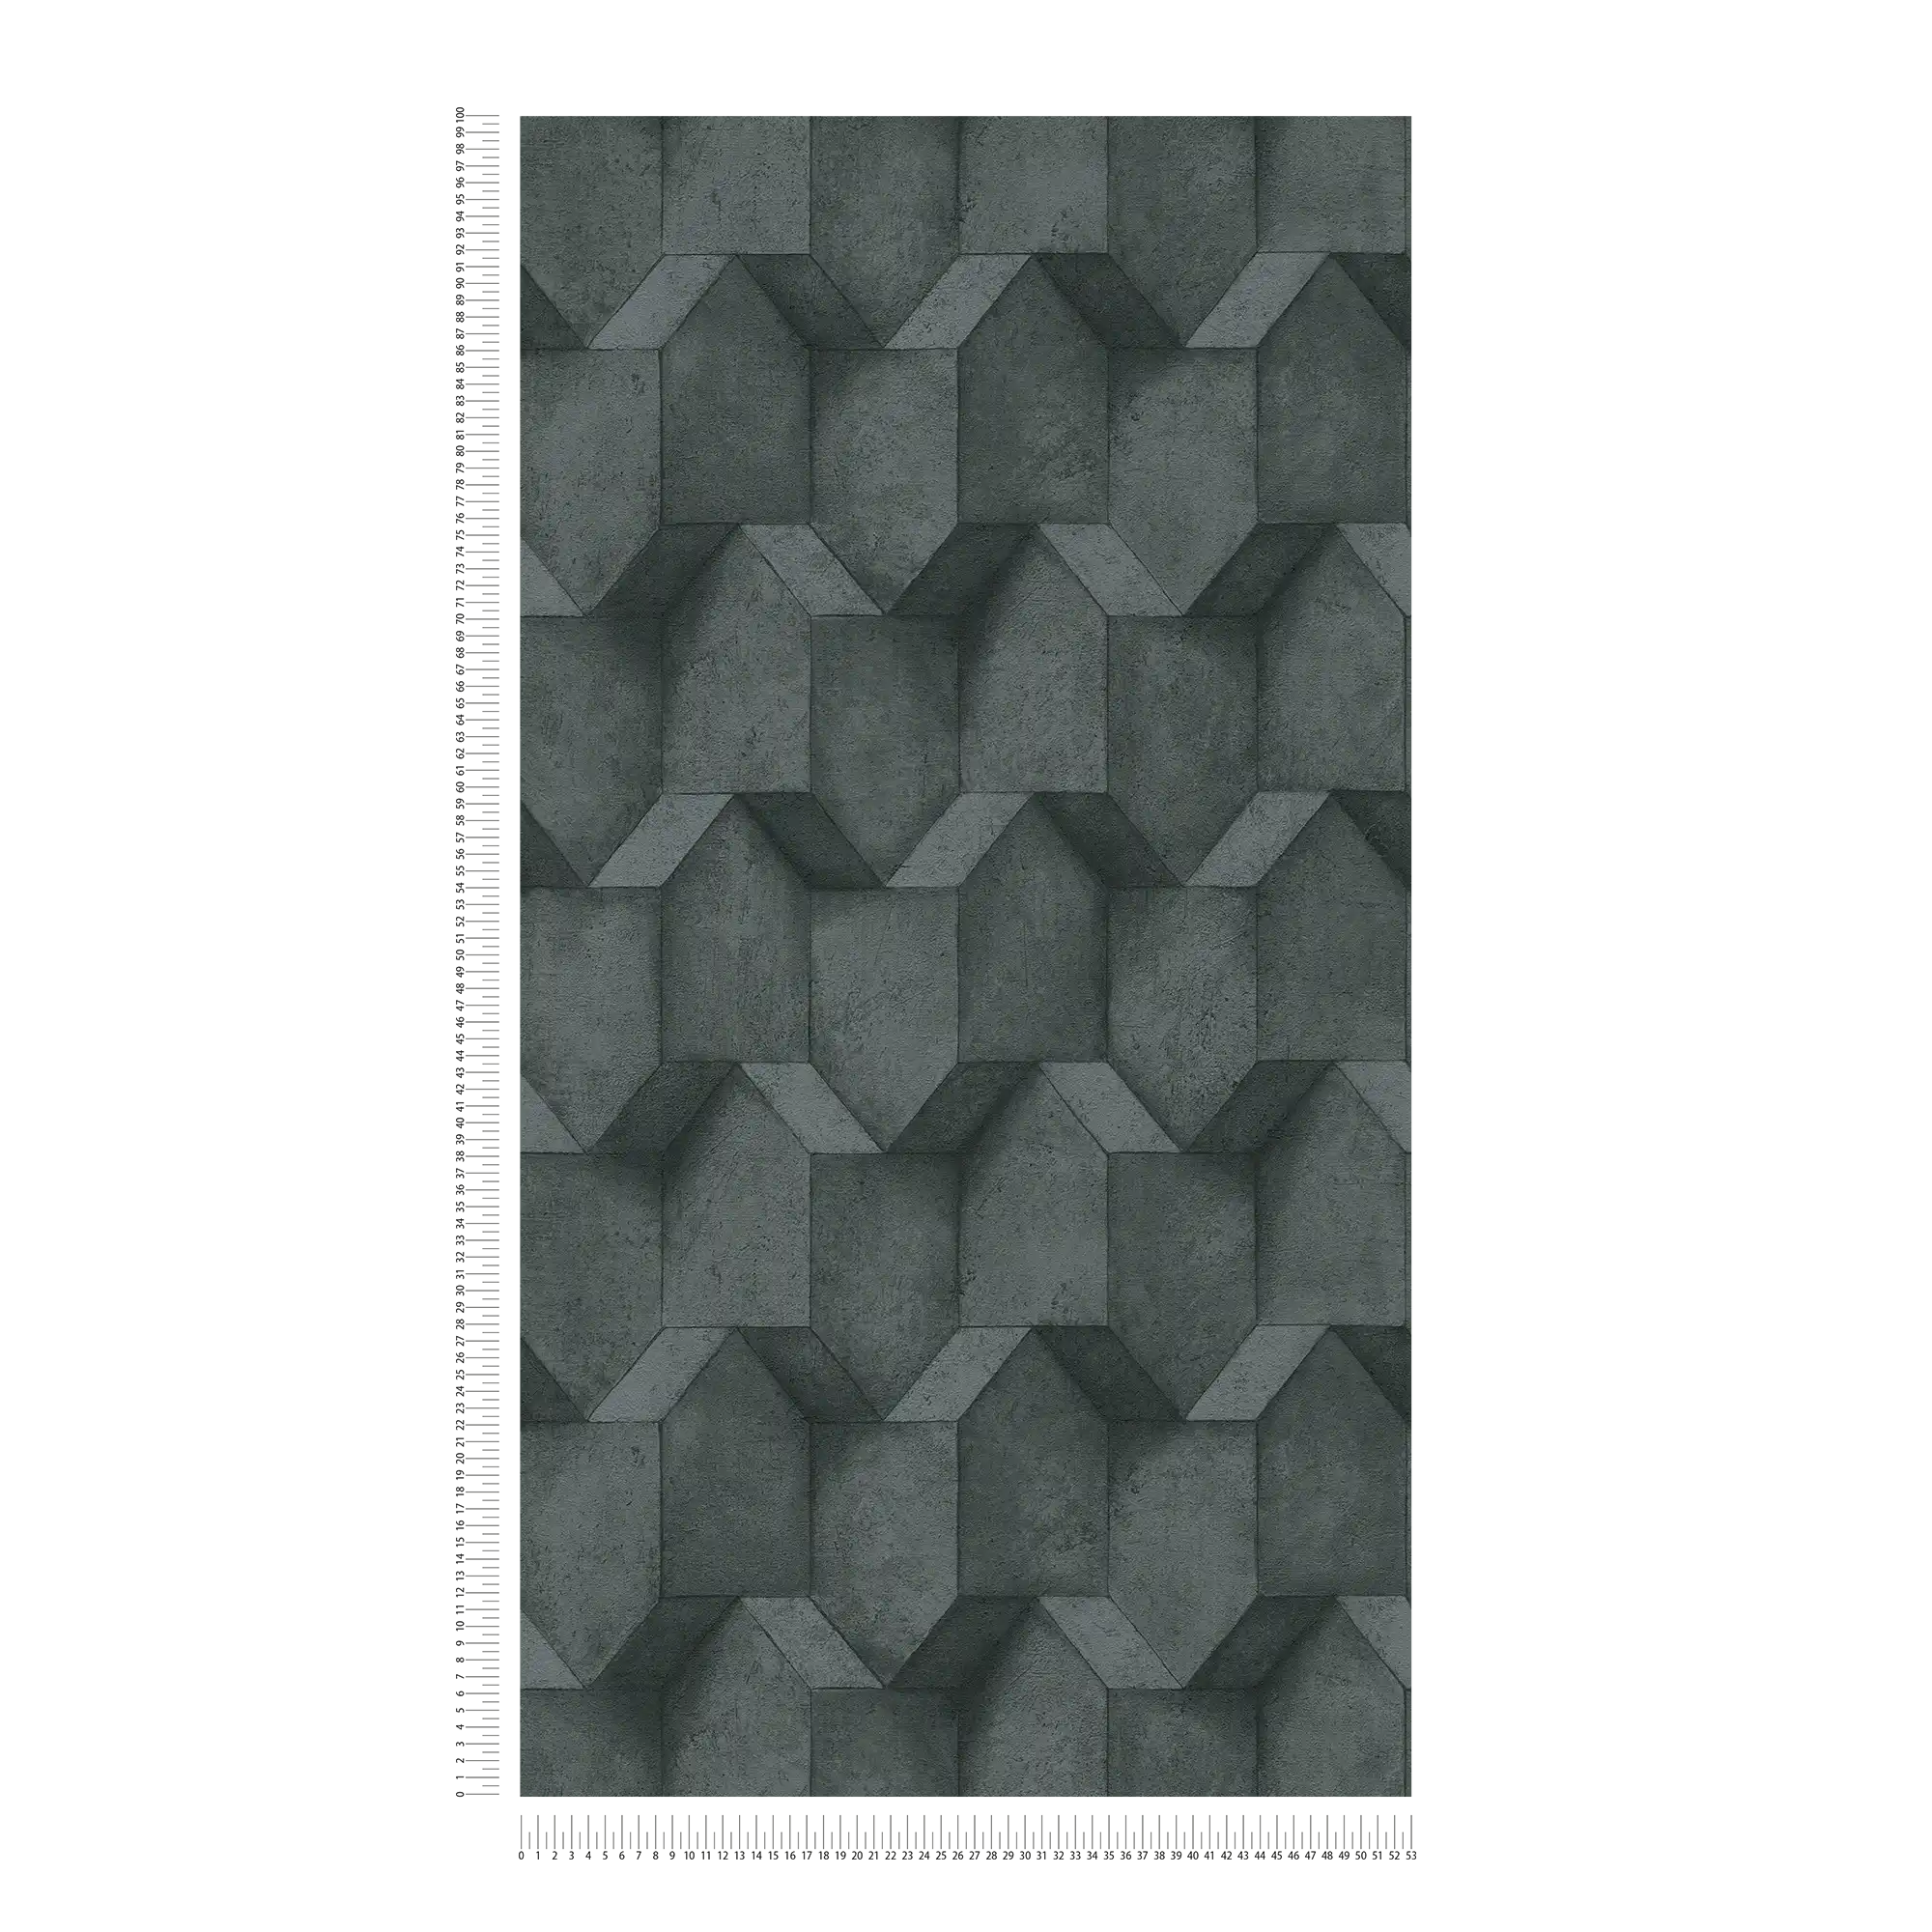             Anthracite wallpaper with 3D concrete look - black, grey
        